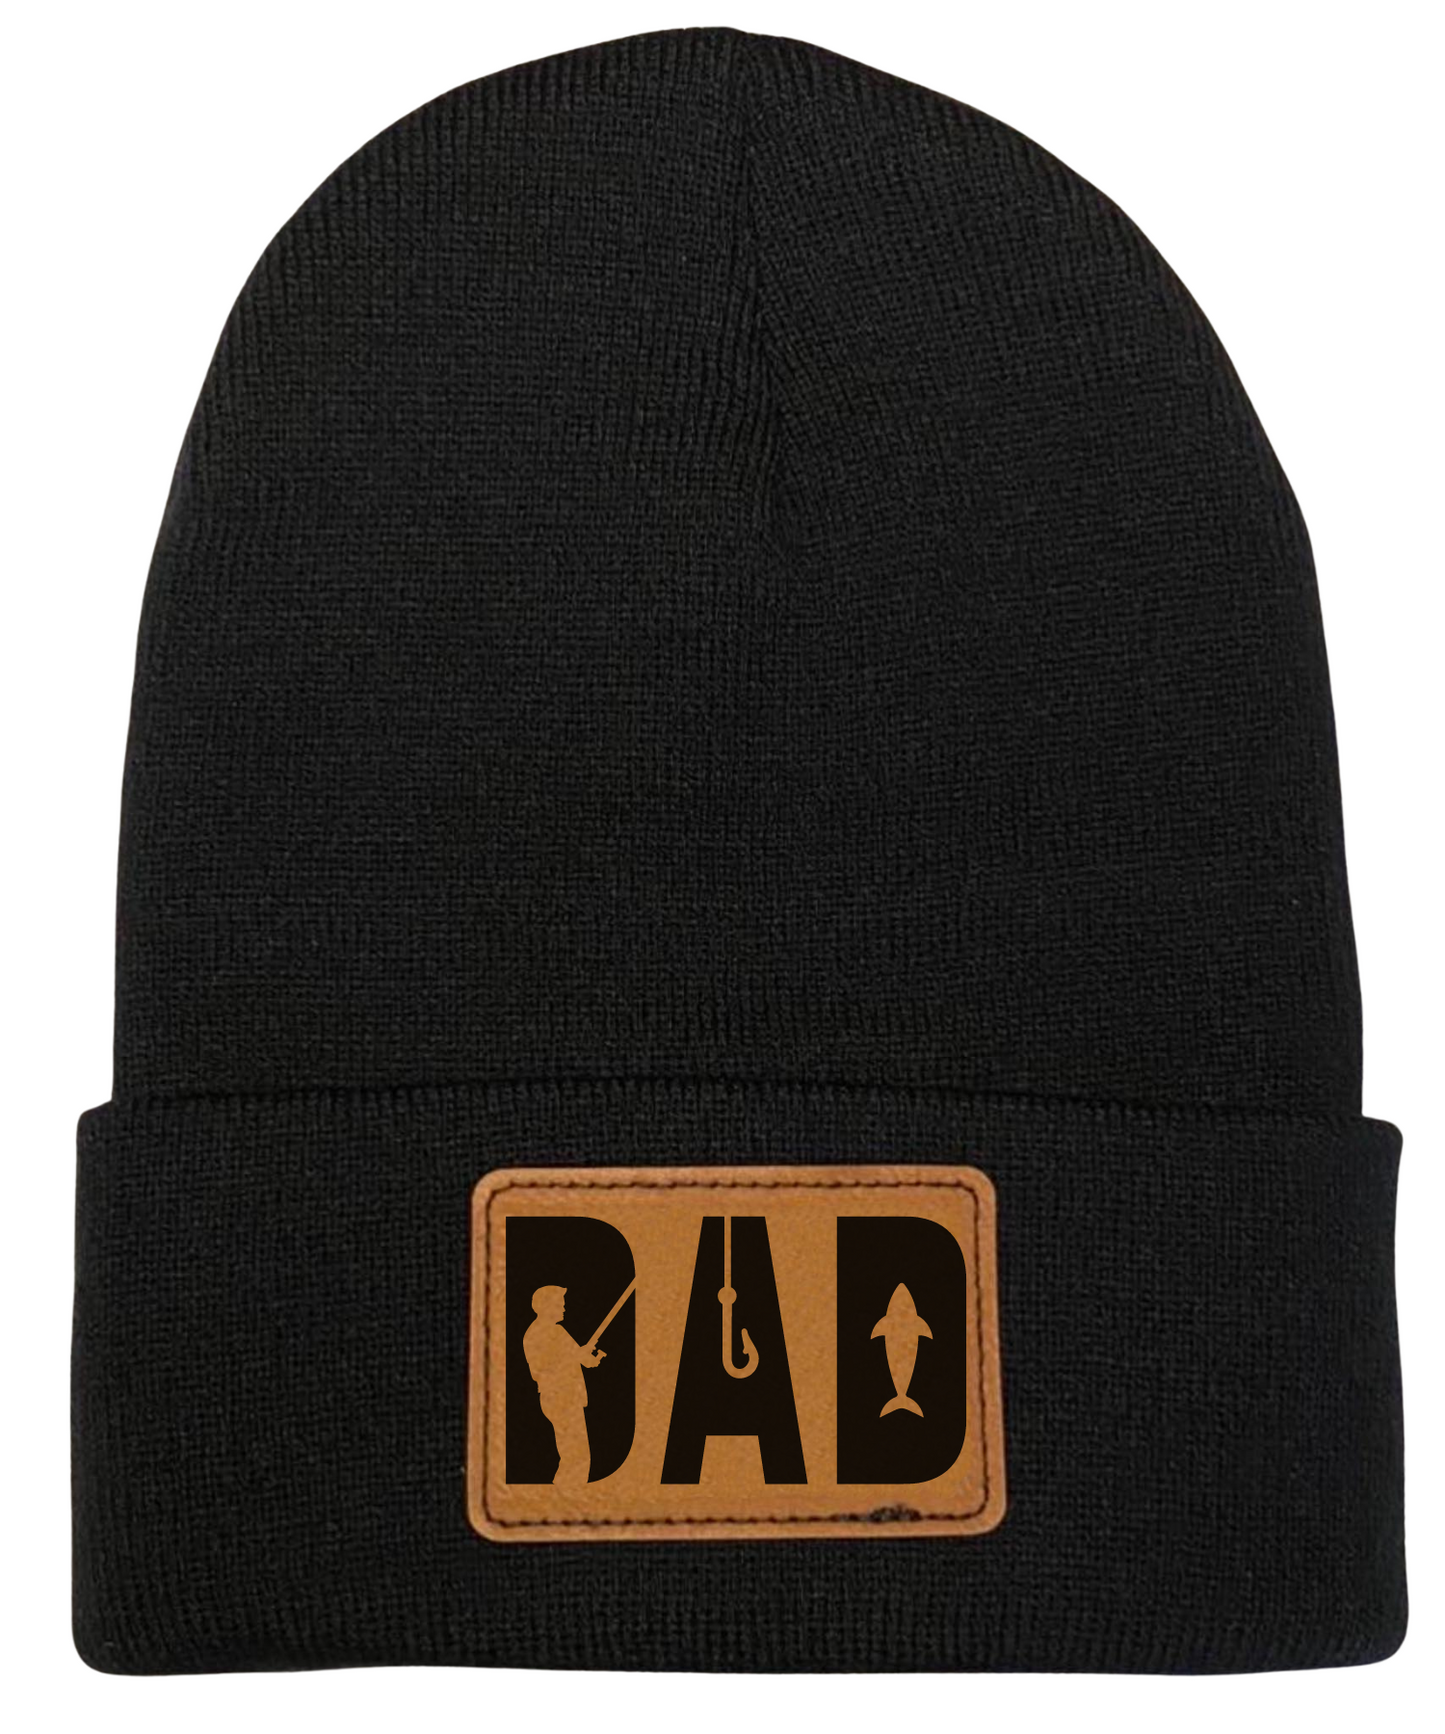 Tuque - DAD Fishing